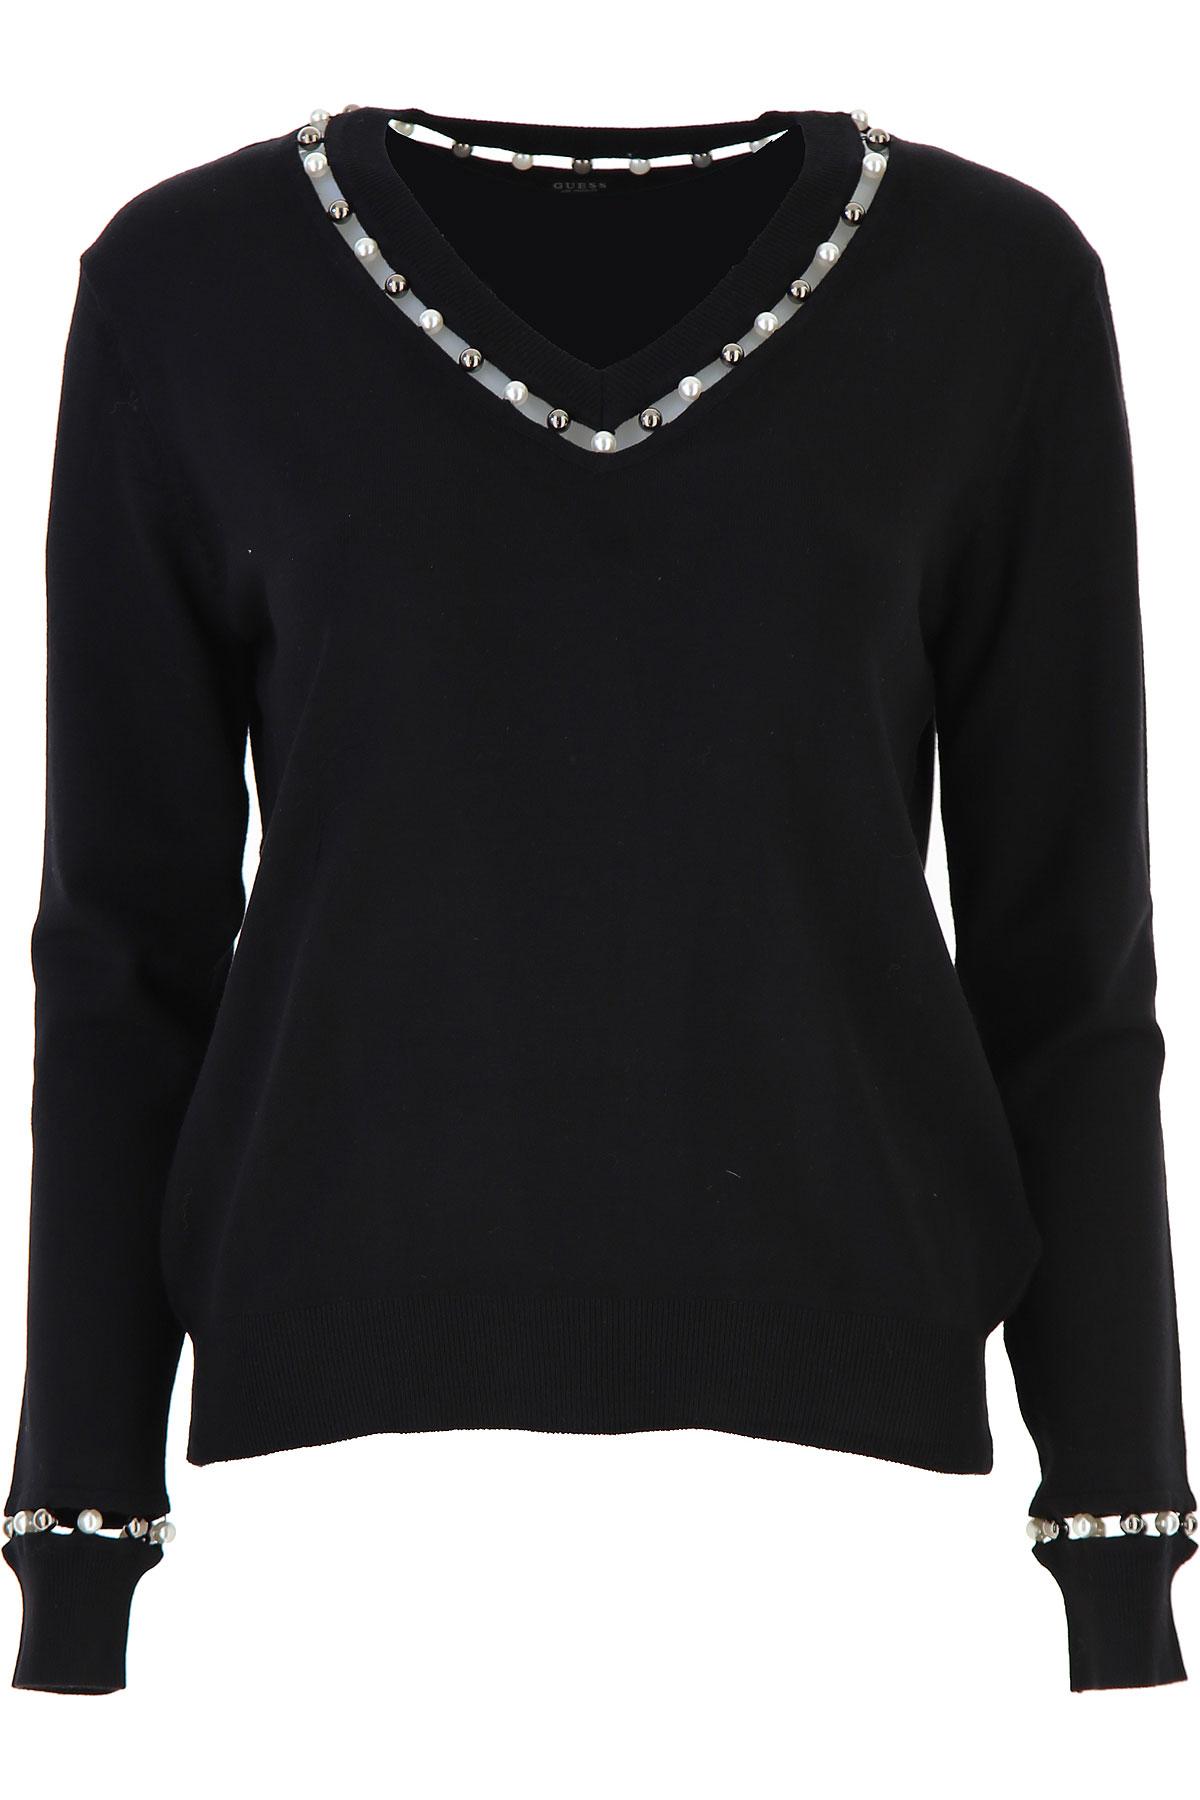 Guess Synthetic Sweater For Women Jumper in Black - Lyst